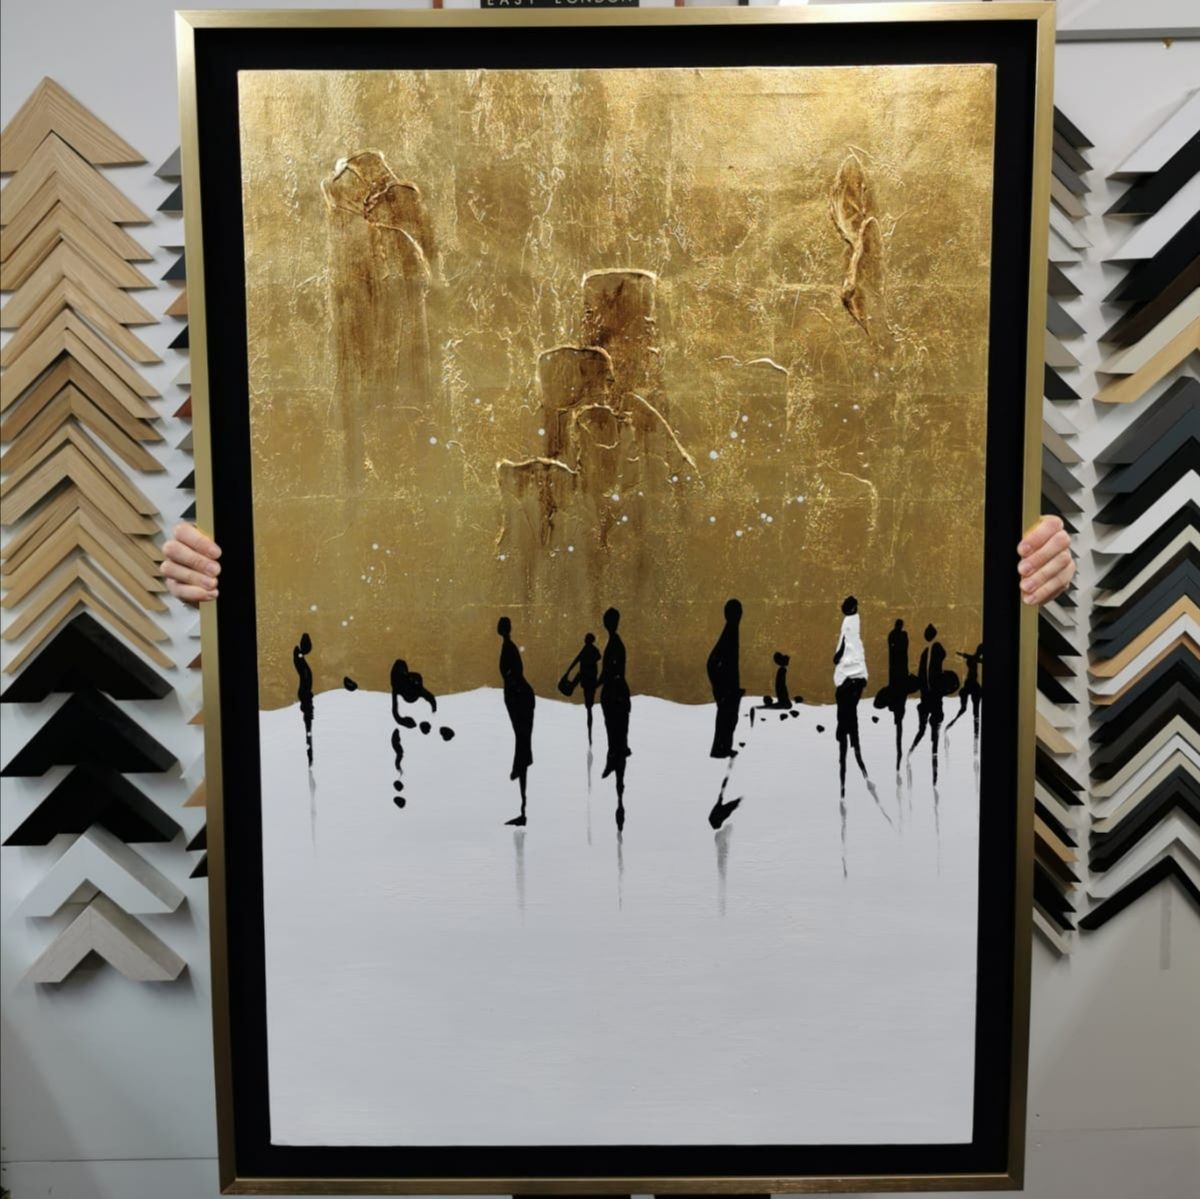 Stretched canvas, floated on a stretched fabric backing in gold #gold #boxframe #stretching #canvas #canvasstretching #pictureframing #customframing #bespoke #bespokeframing #boxframe #artglass #london #hackney #hackneyroad #shoreditch #raysframes